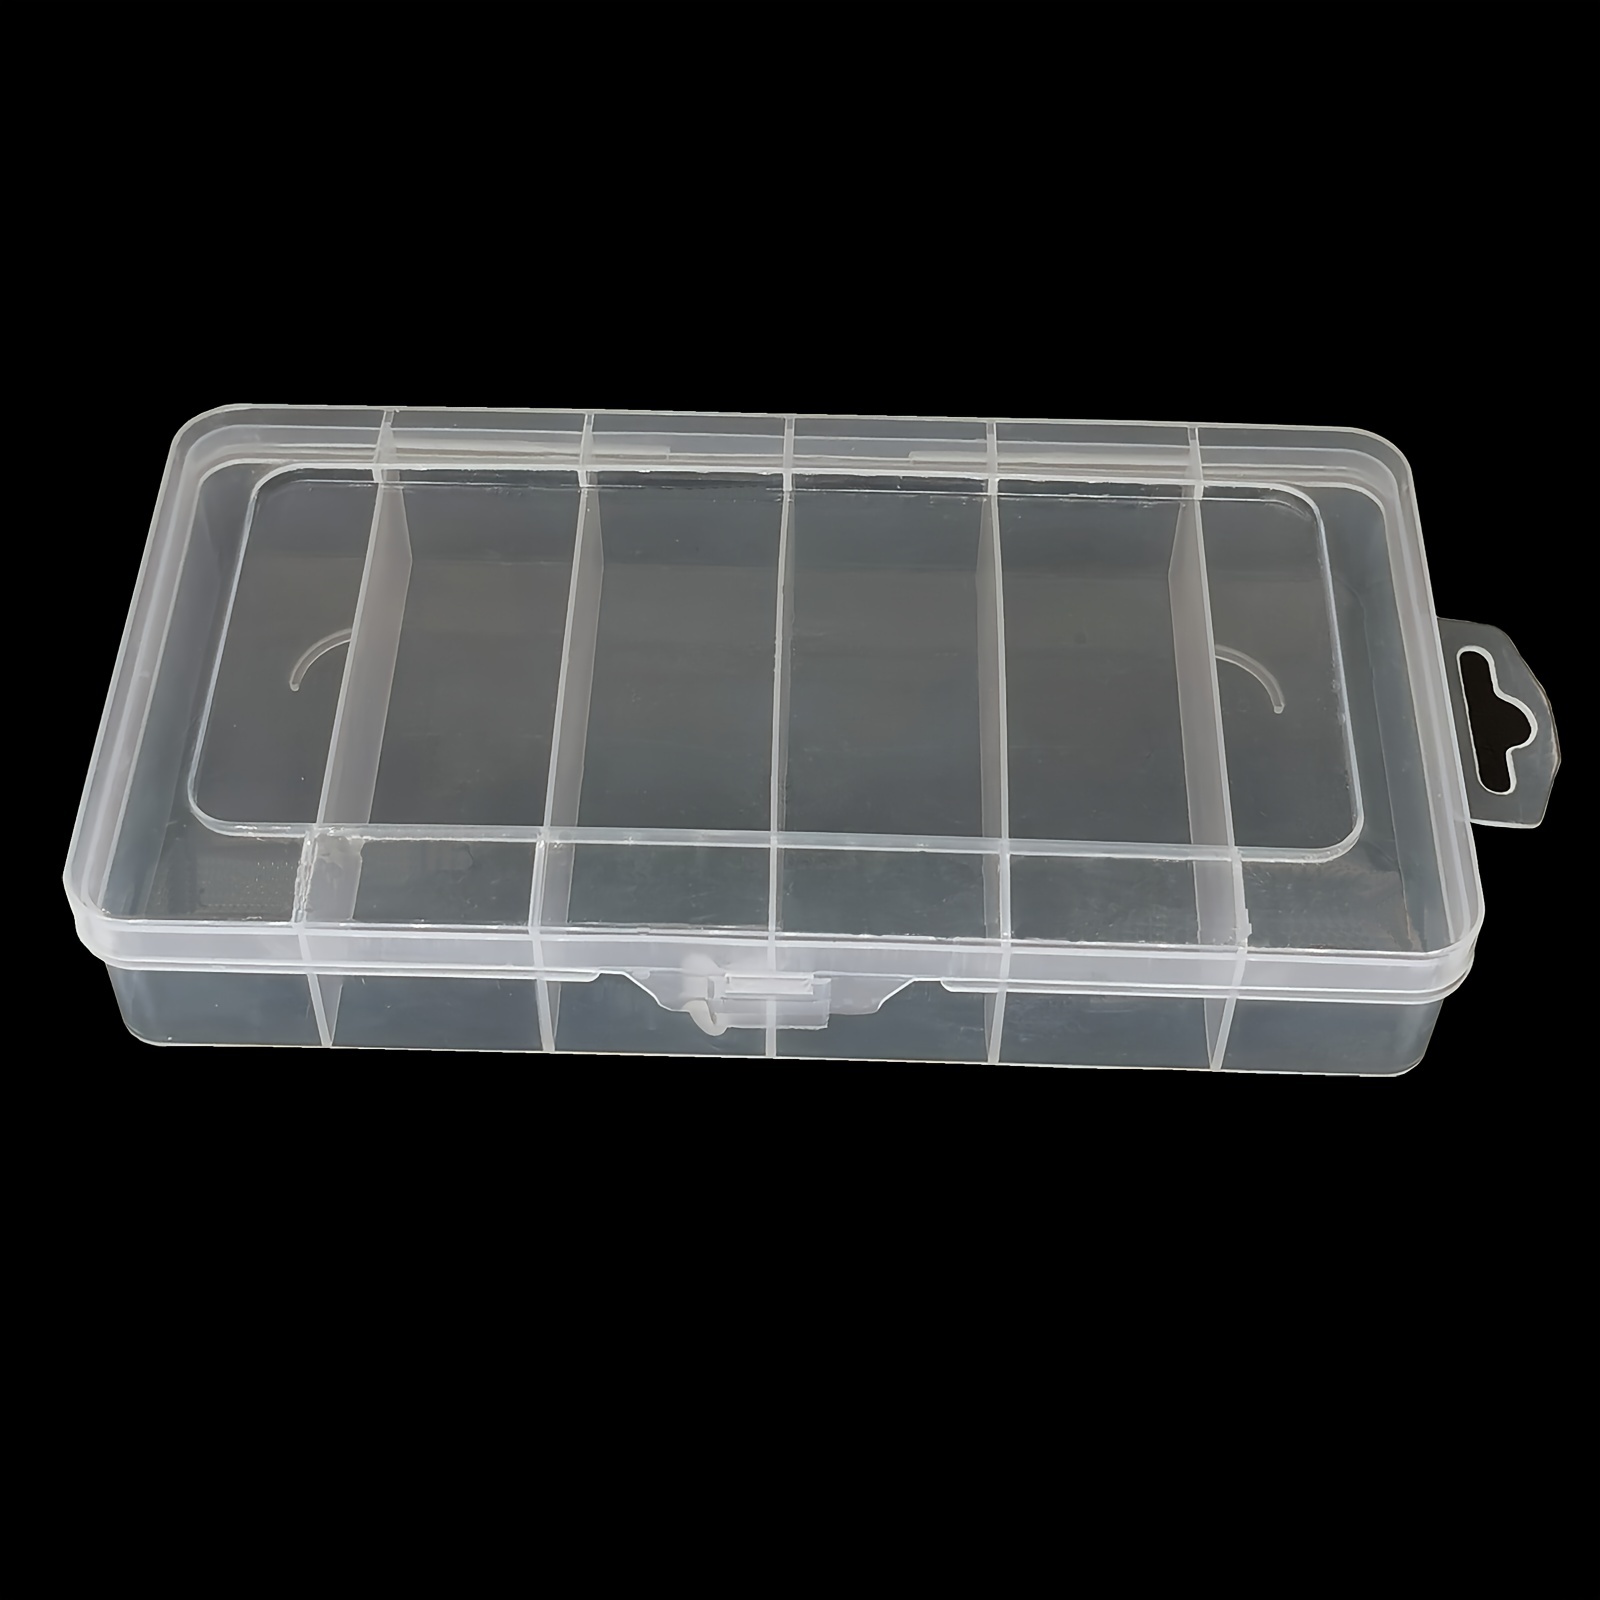 24 Pcs Mixed Sizes Small Plastic Box Rectangular Mini Clear Plastic Storage Containers Plastic Beads Storage Containers Empty Case Organizer with Hing